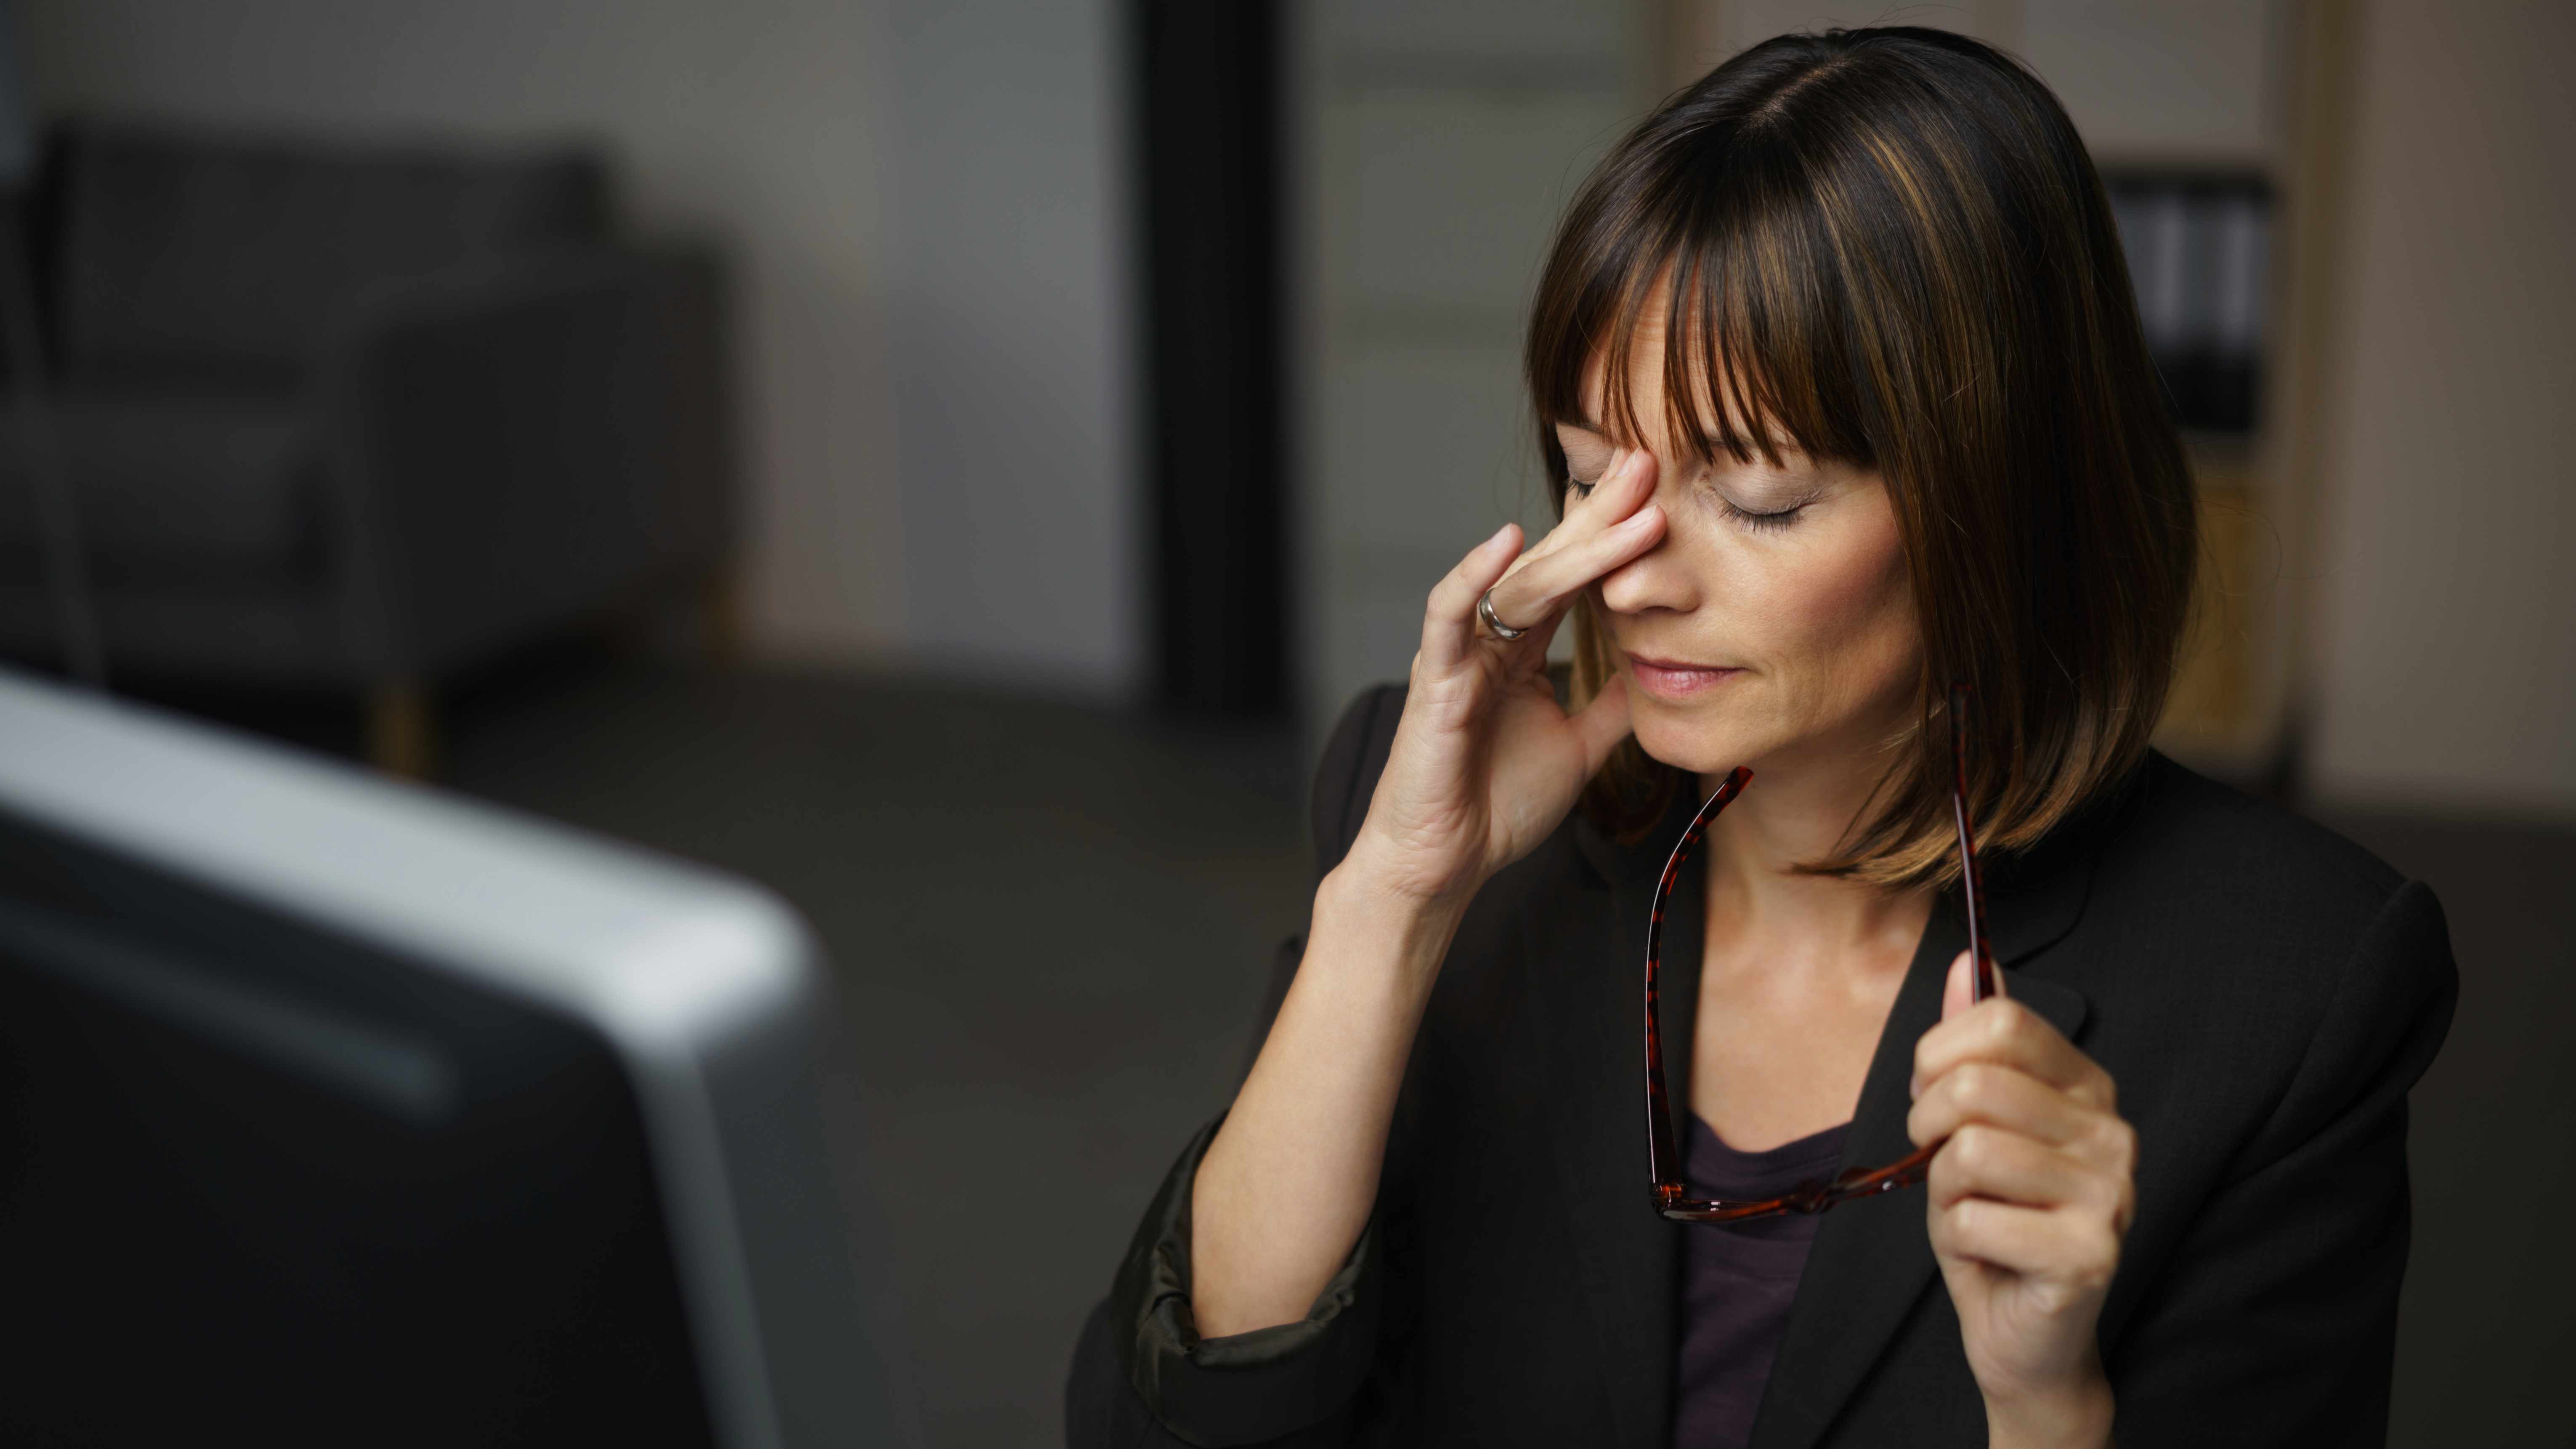 a young woman sitting at a computer in an office looking tired and touching her face like she has a headache